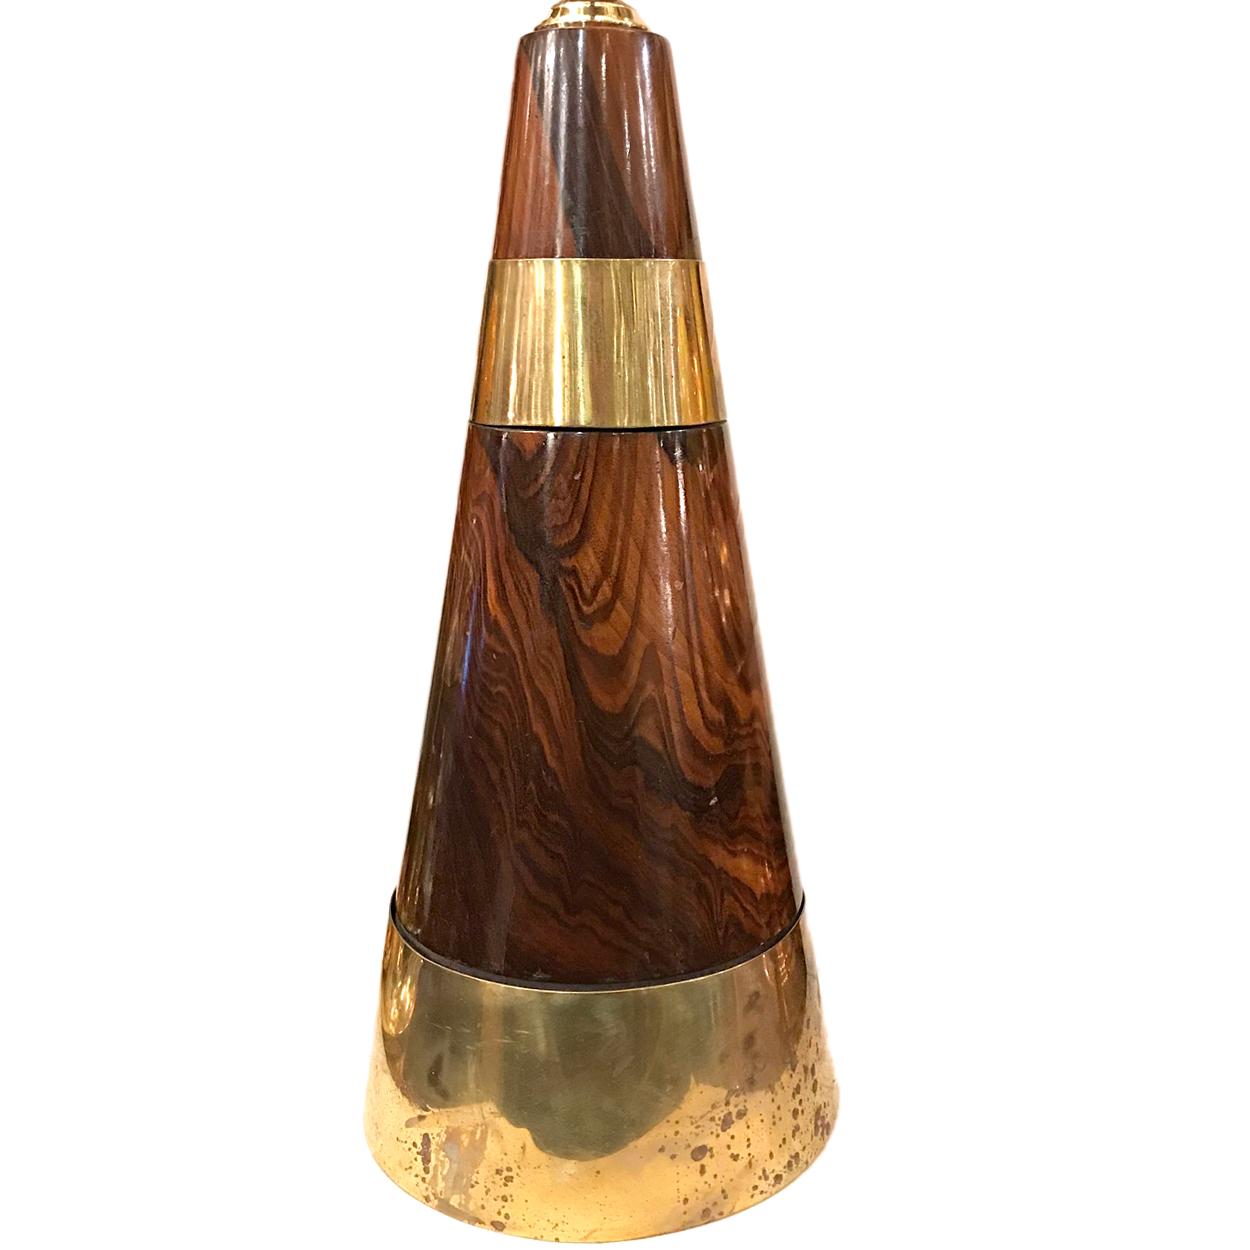 A single circa 1950's Italian wood and brass table lamp in a conical shape. 

Measurements:
Height of body: 15